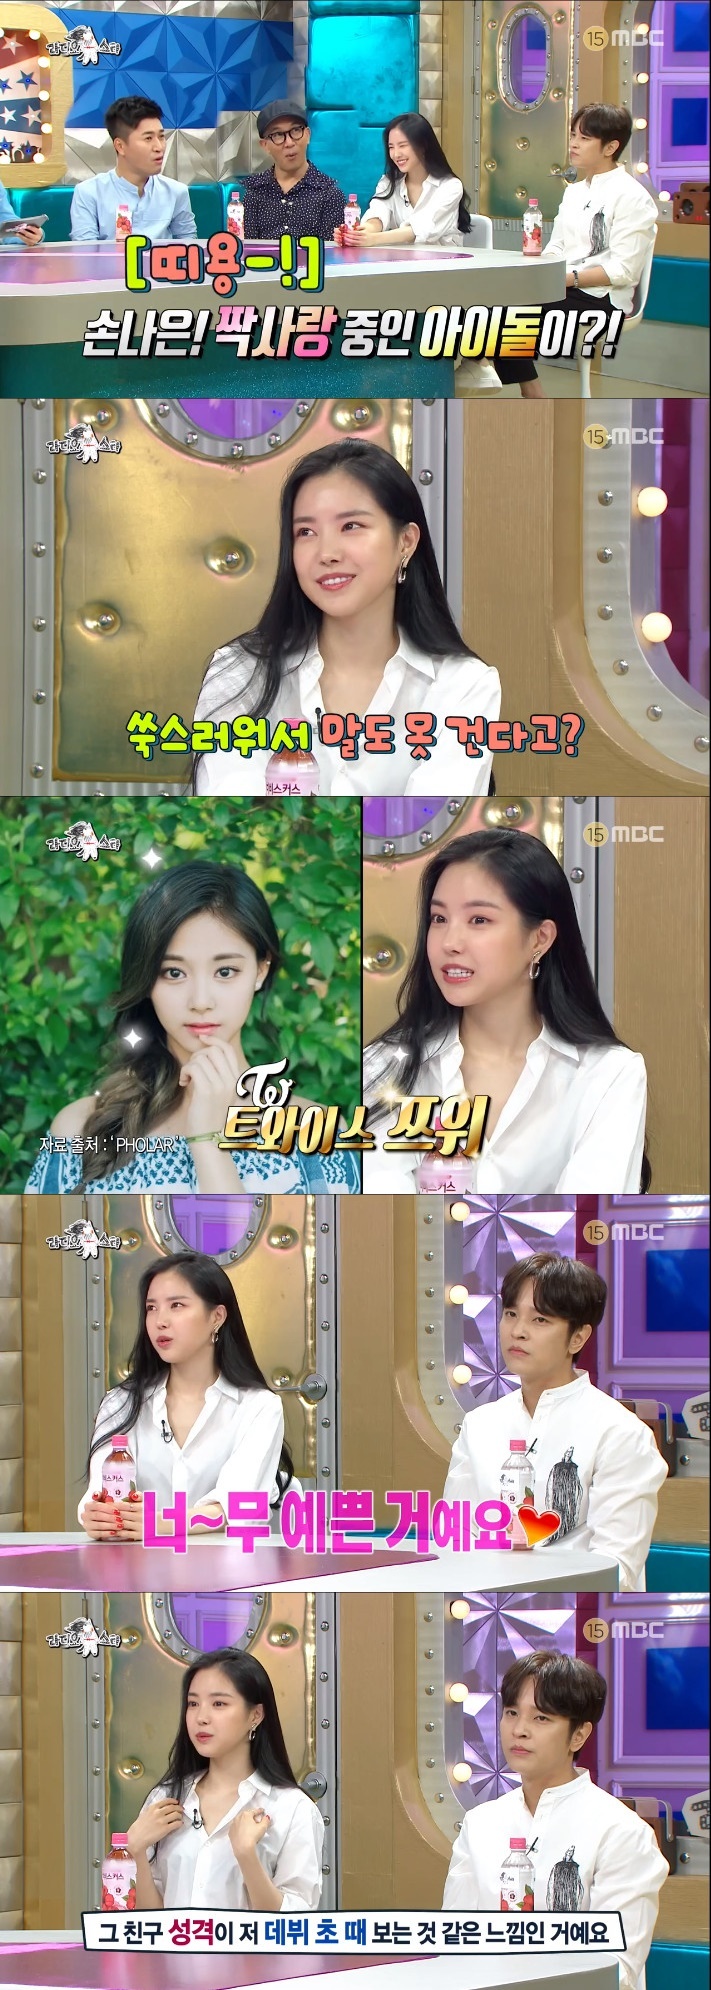 On the MBC entertainment program Radio Star broadcasted on the 1st, Son Na-eun said he was a fan of TWICE TZUYU.Son Na-eun recently expressed his affection for TWICE TZUYU, responding to MCs saying that there is an unrequited Idol.That Friend personality seemed to see me at DeV seconds, so I was very heartbroken, he said.I always go with my mom, Son Na-eun replied, asking if he had ever been alone to meet Friend, adding, I tend to talk to my mom a lot.In that regard, Kim Guura replied that he could consider his mothers opinion if his mother opposed the man he liked.